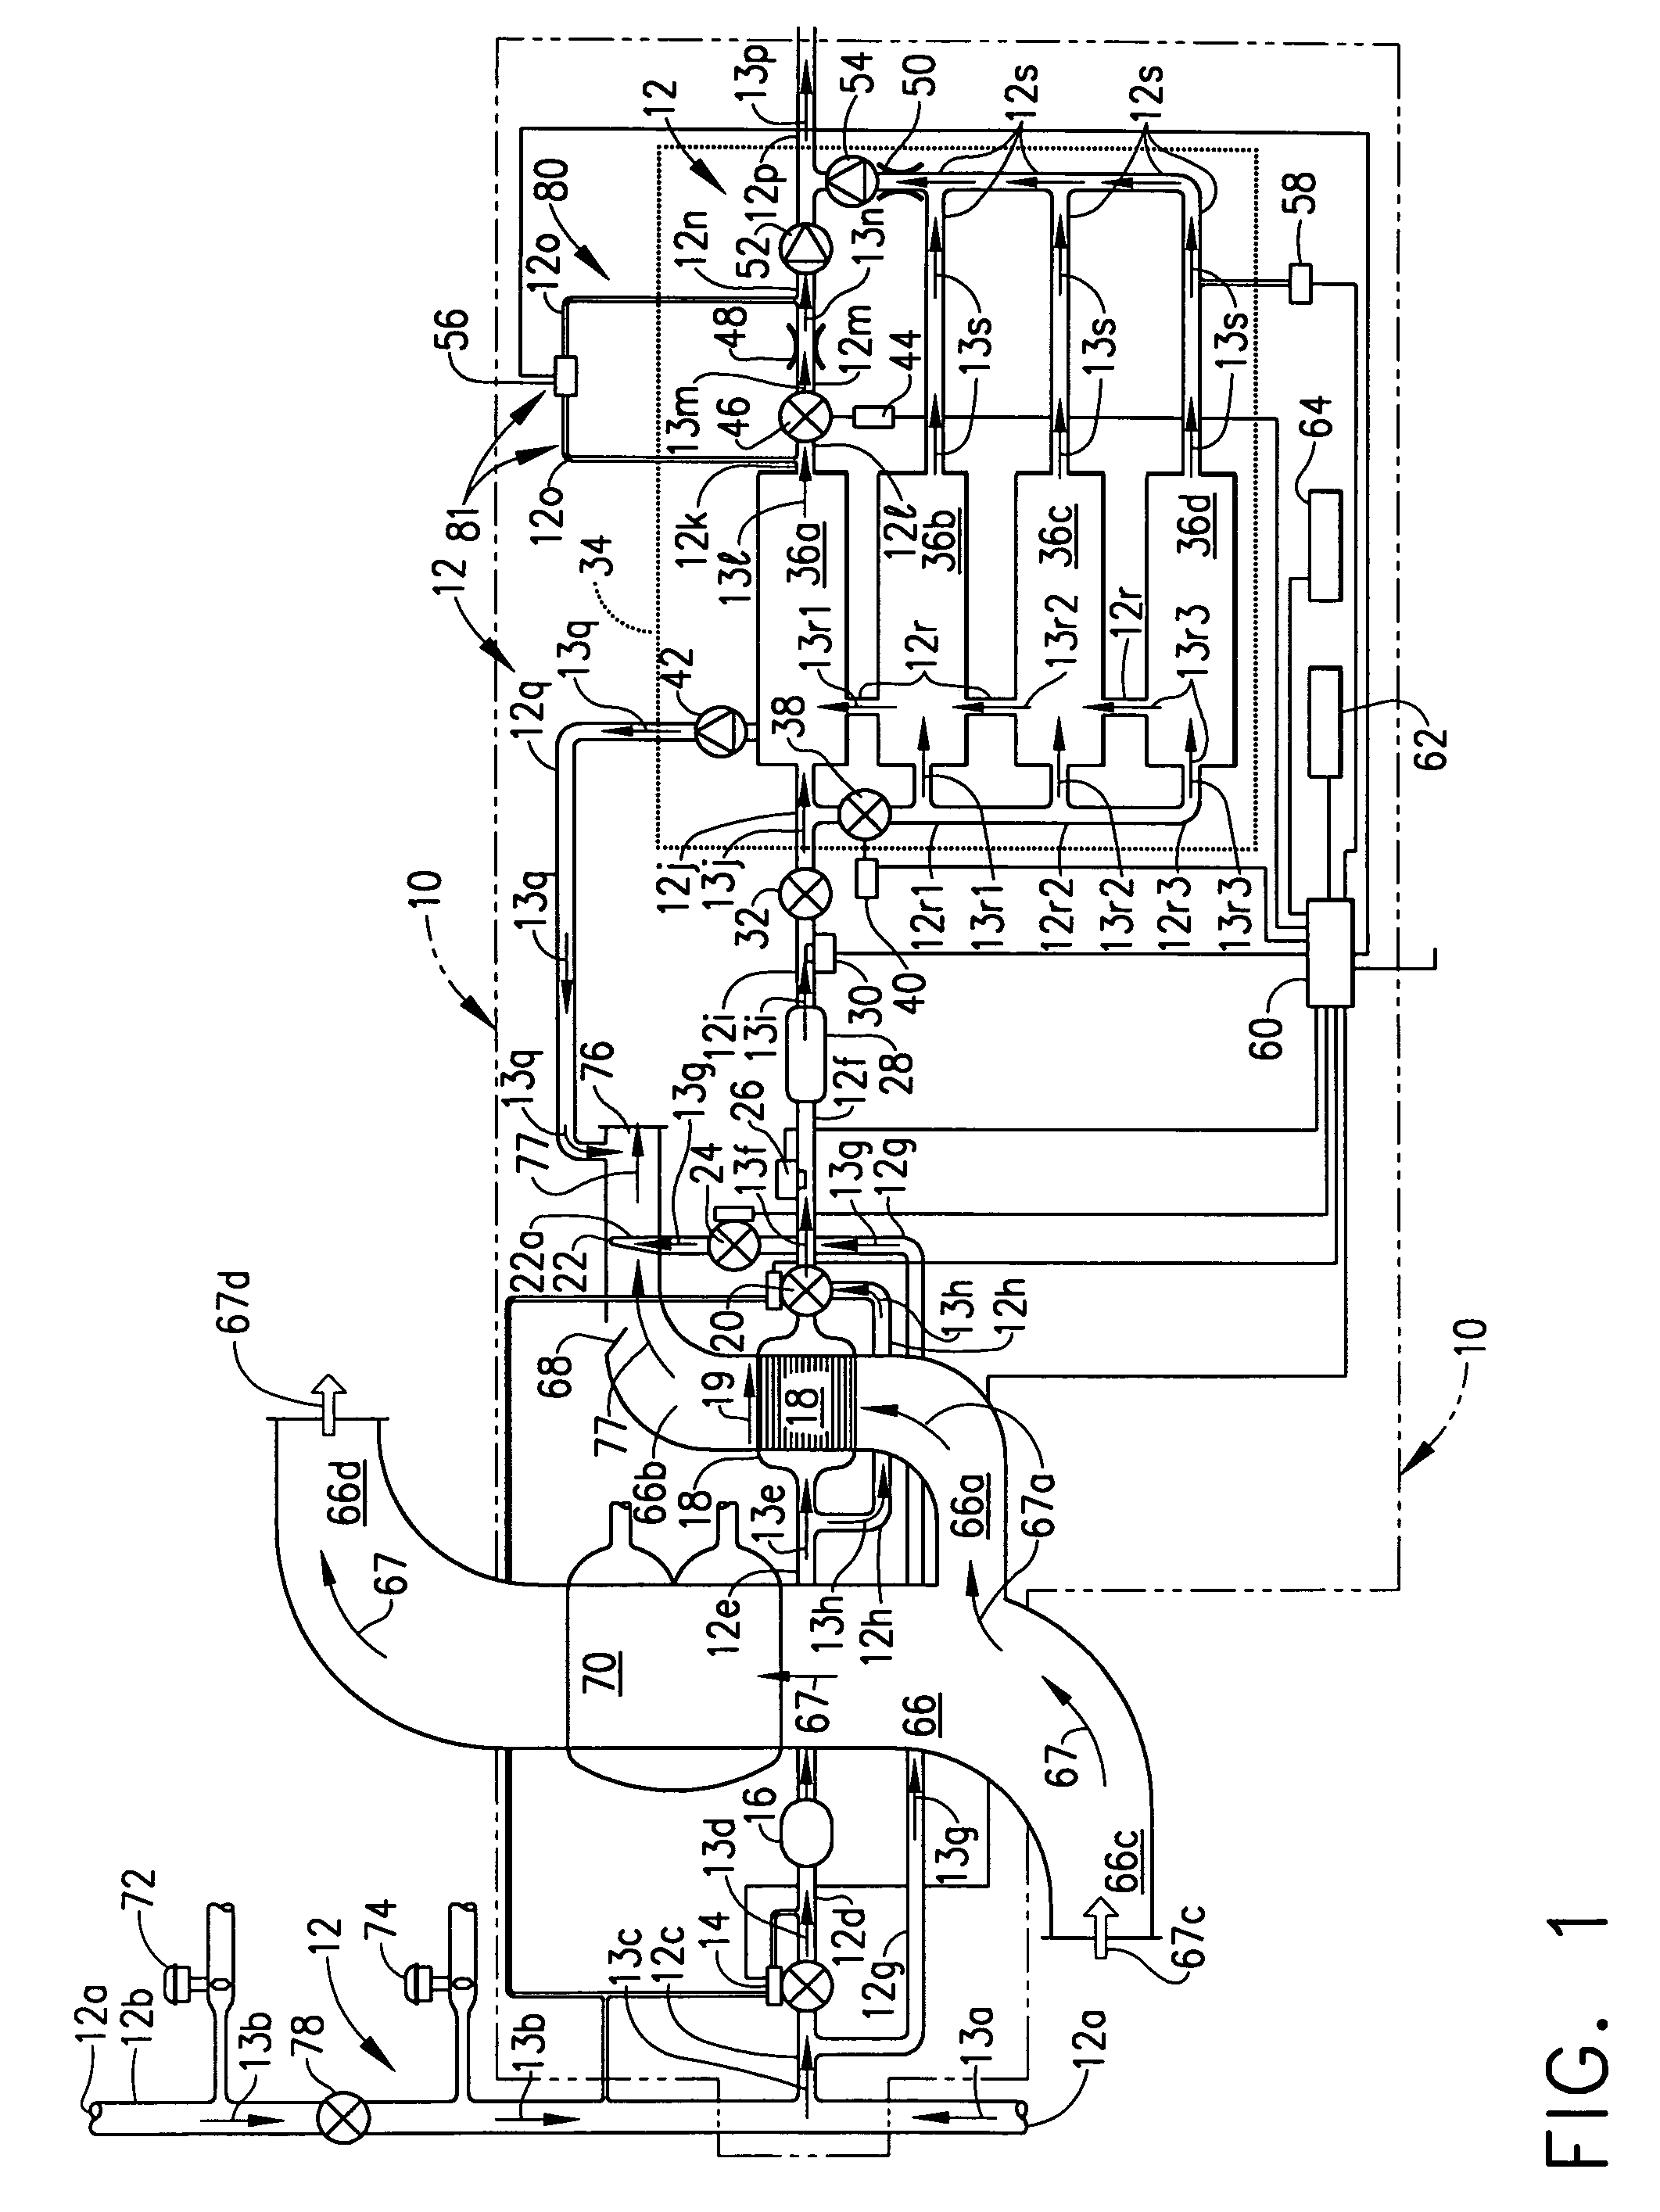 Gas generating system and method for inerting aircraft fuel tanks